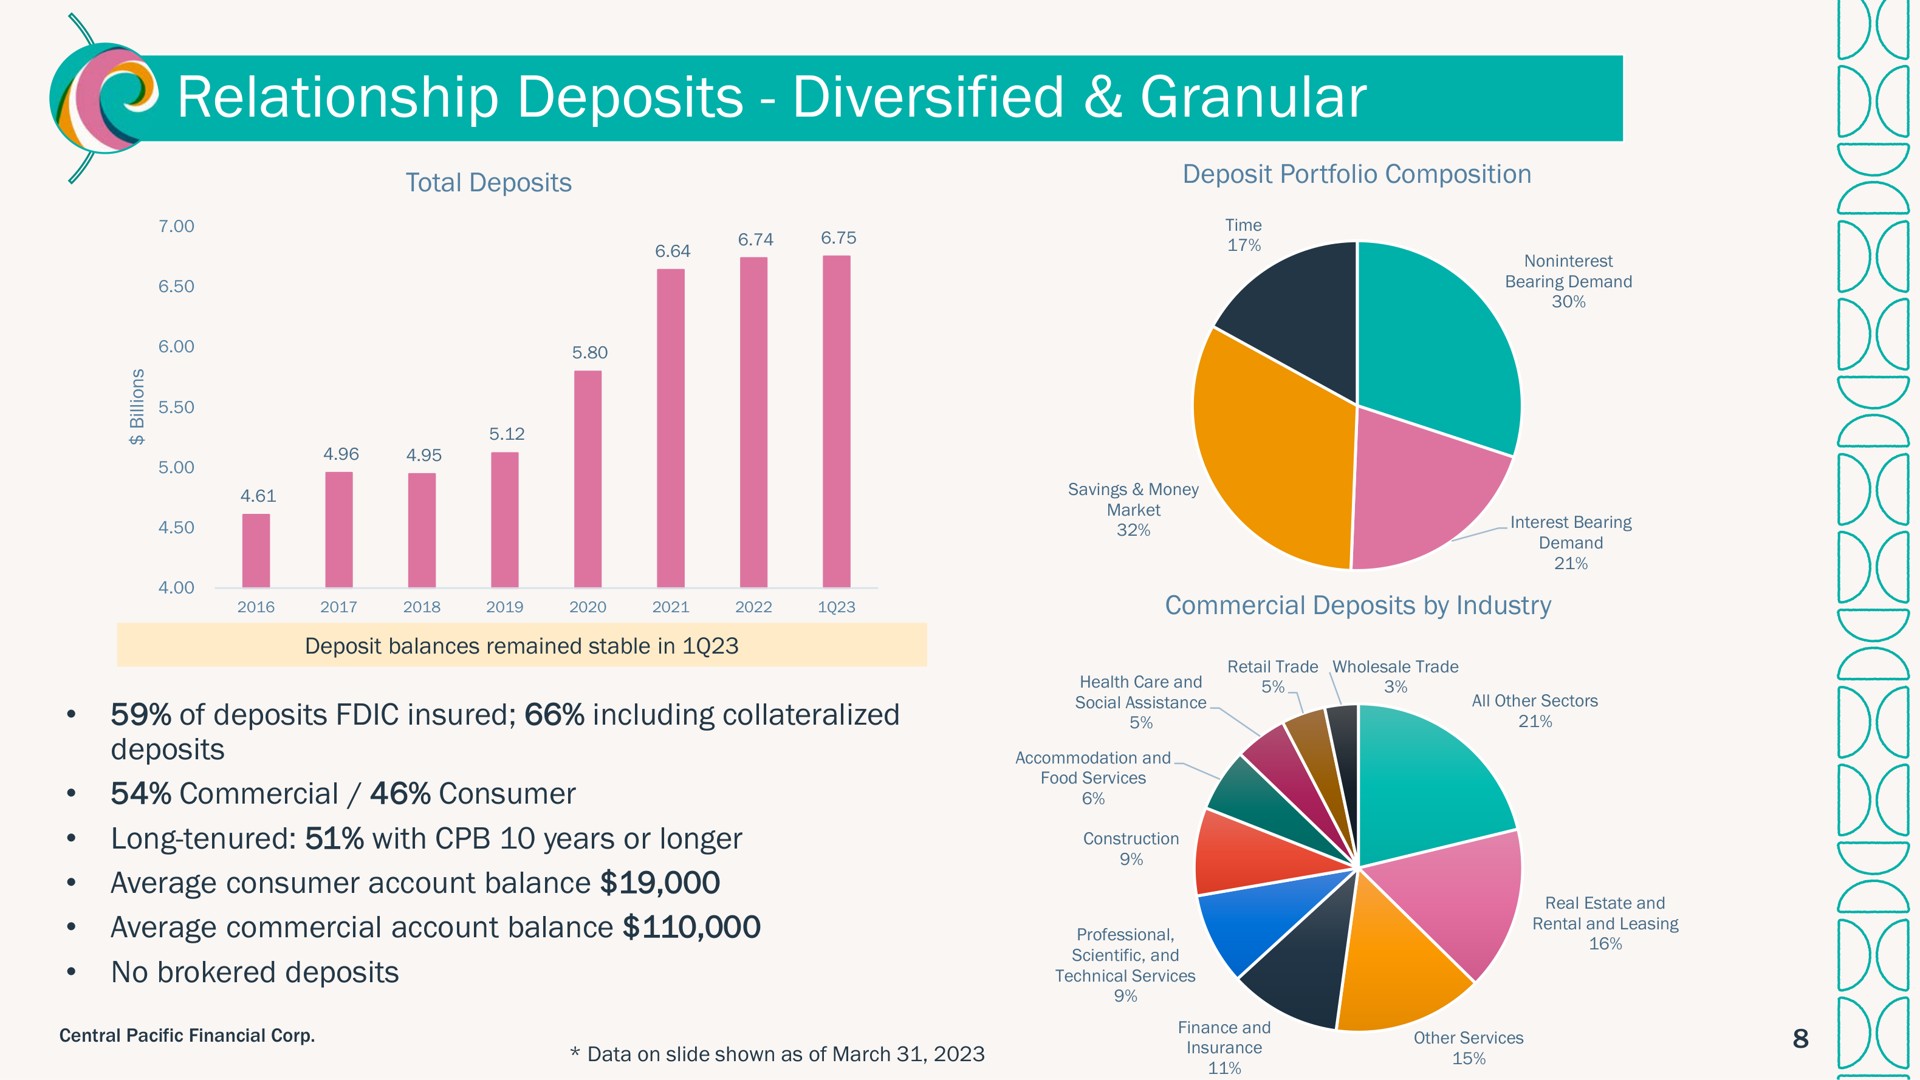 relationship deposits diversified granular | Central Pacific Financial